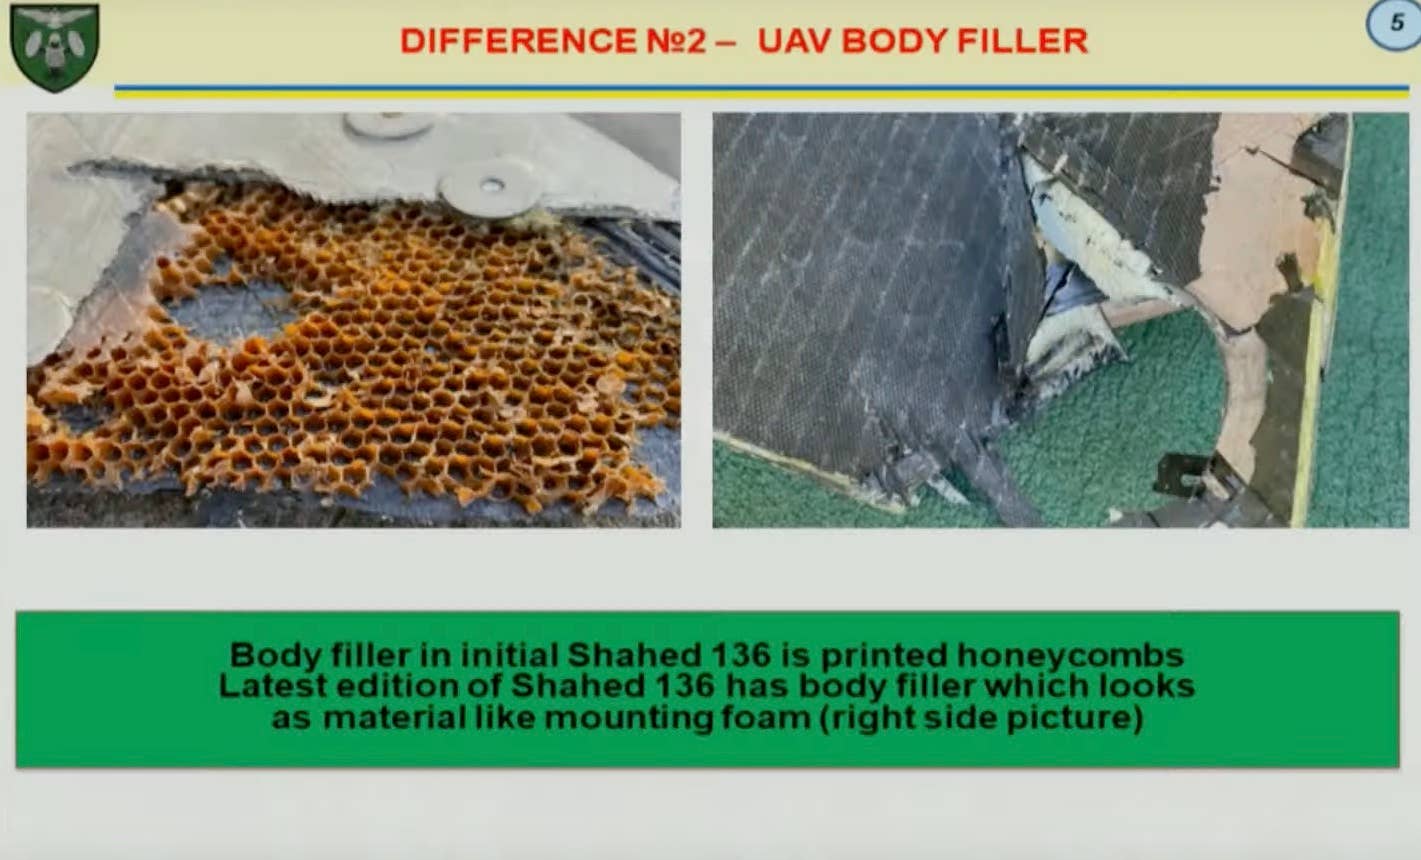 The new Shahed-136 drones also have a solid foam-like filling instead of the honeycomb cell filling, according to Ukraine. (Ukrainian Military Media Center screencap)